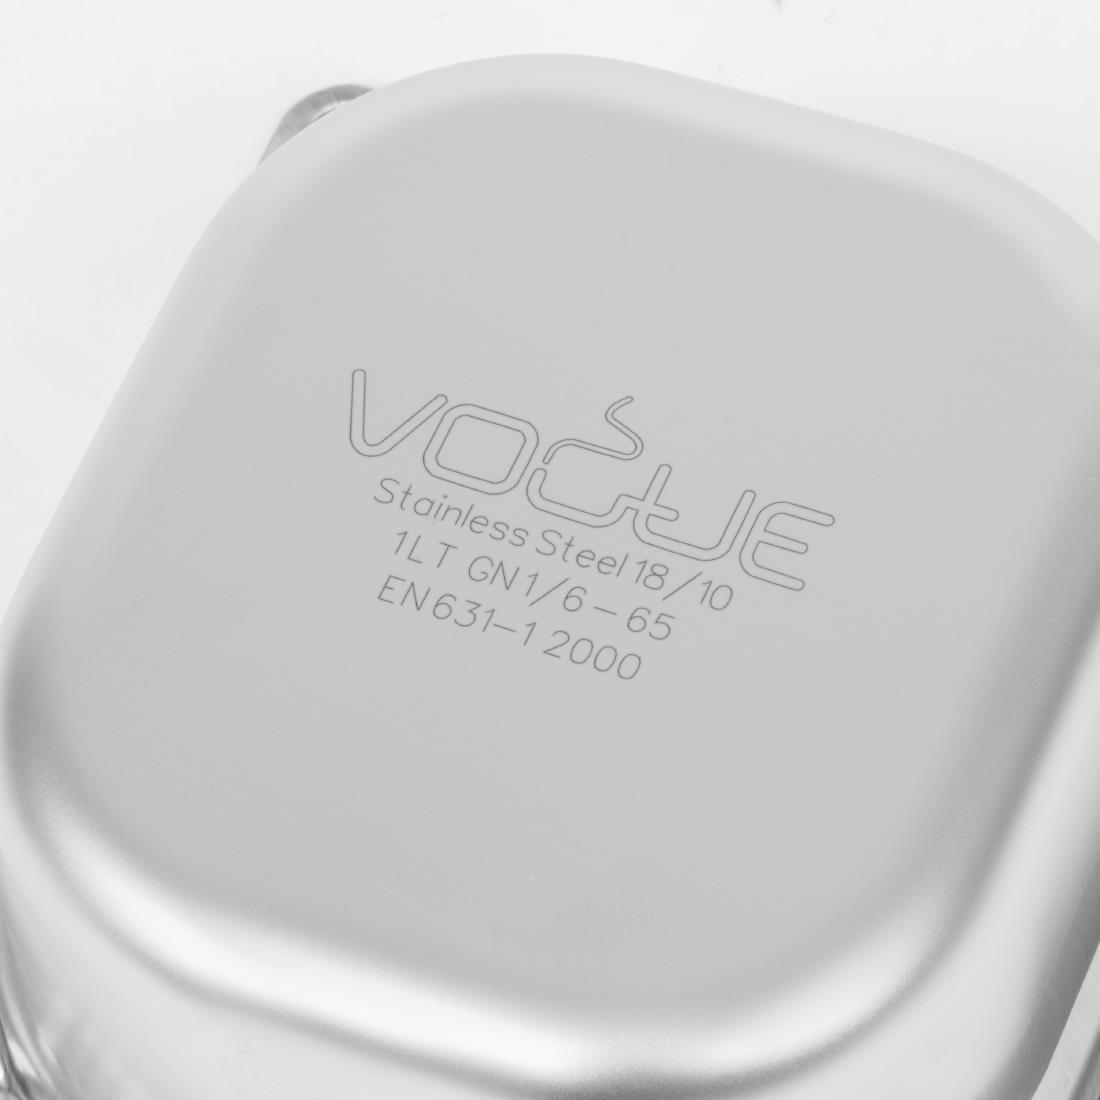 Vogue Heavy Duty Stainless Steel 1/6 Gastronorm Pan 65mm - DW449  - 7